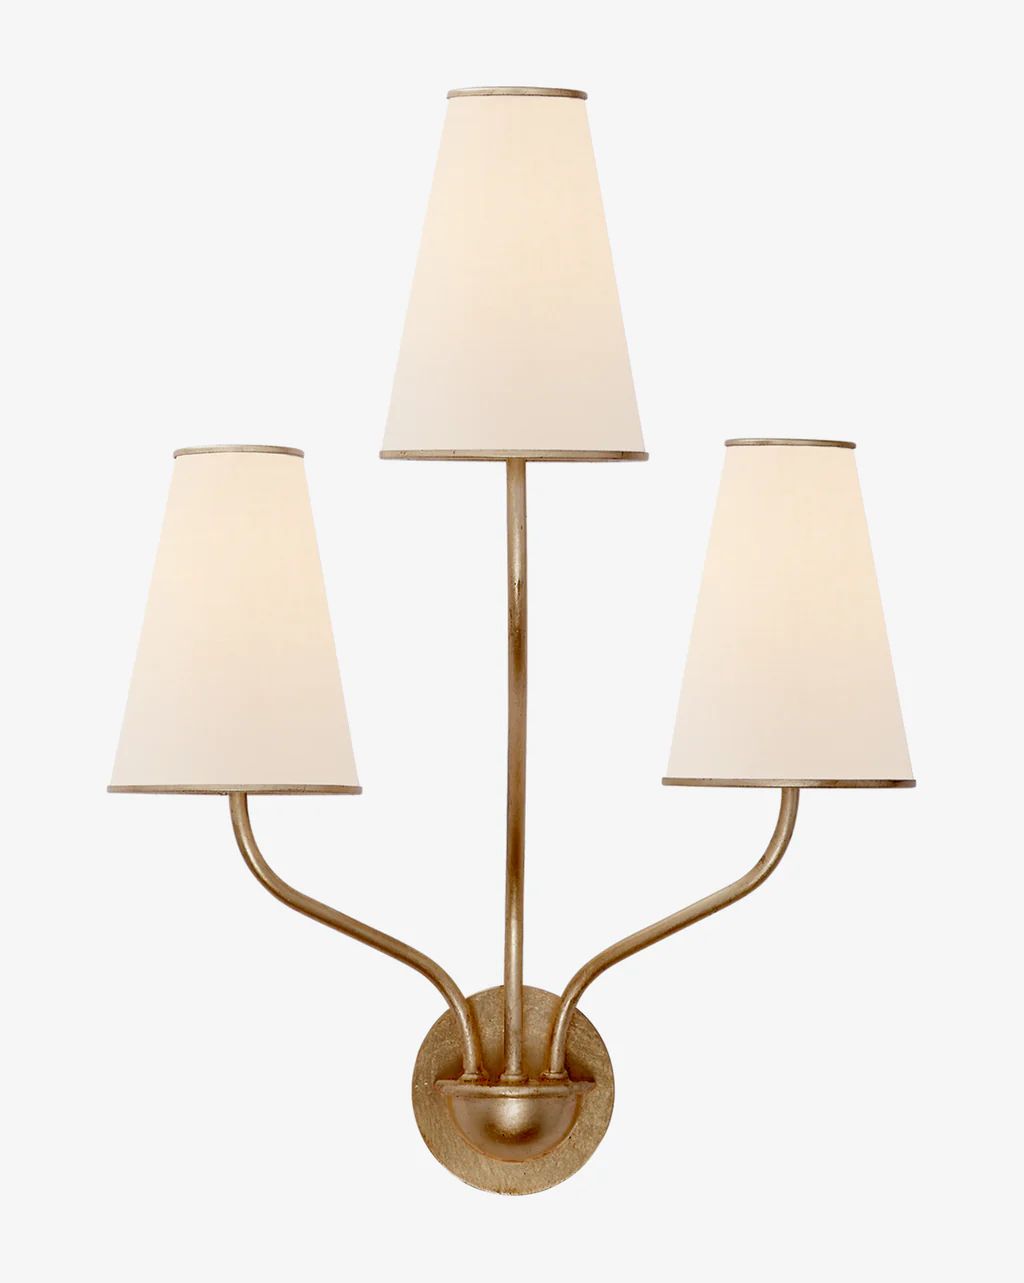 Montreuil Wall Sconce | McGee & Co.